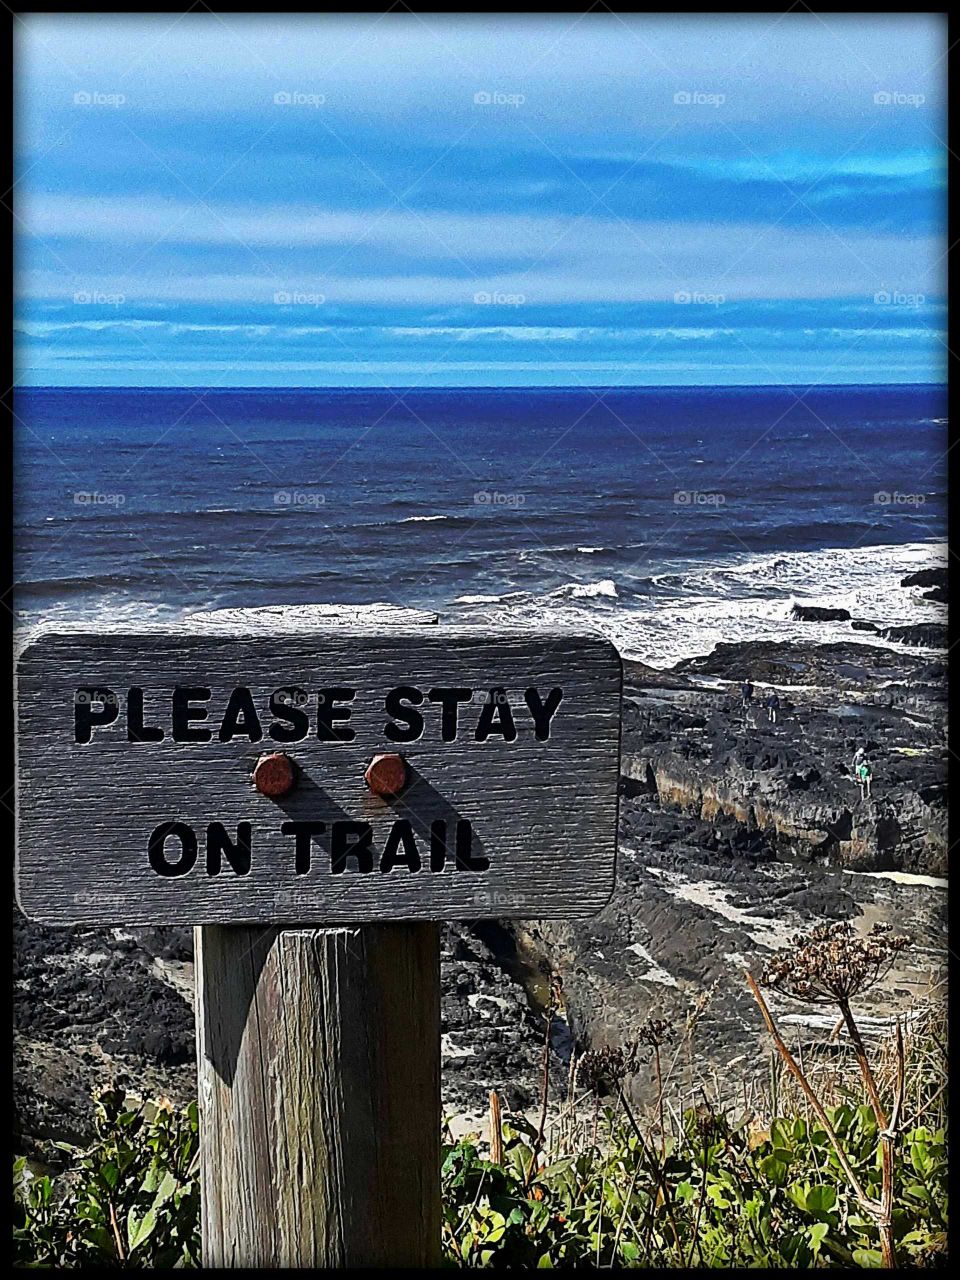 please stay on trail